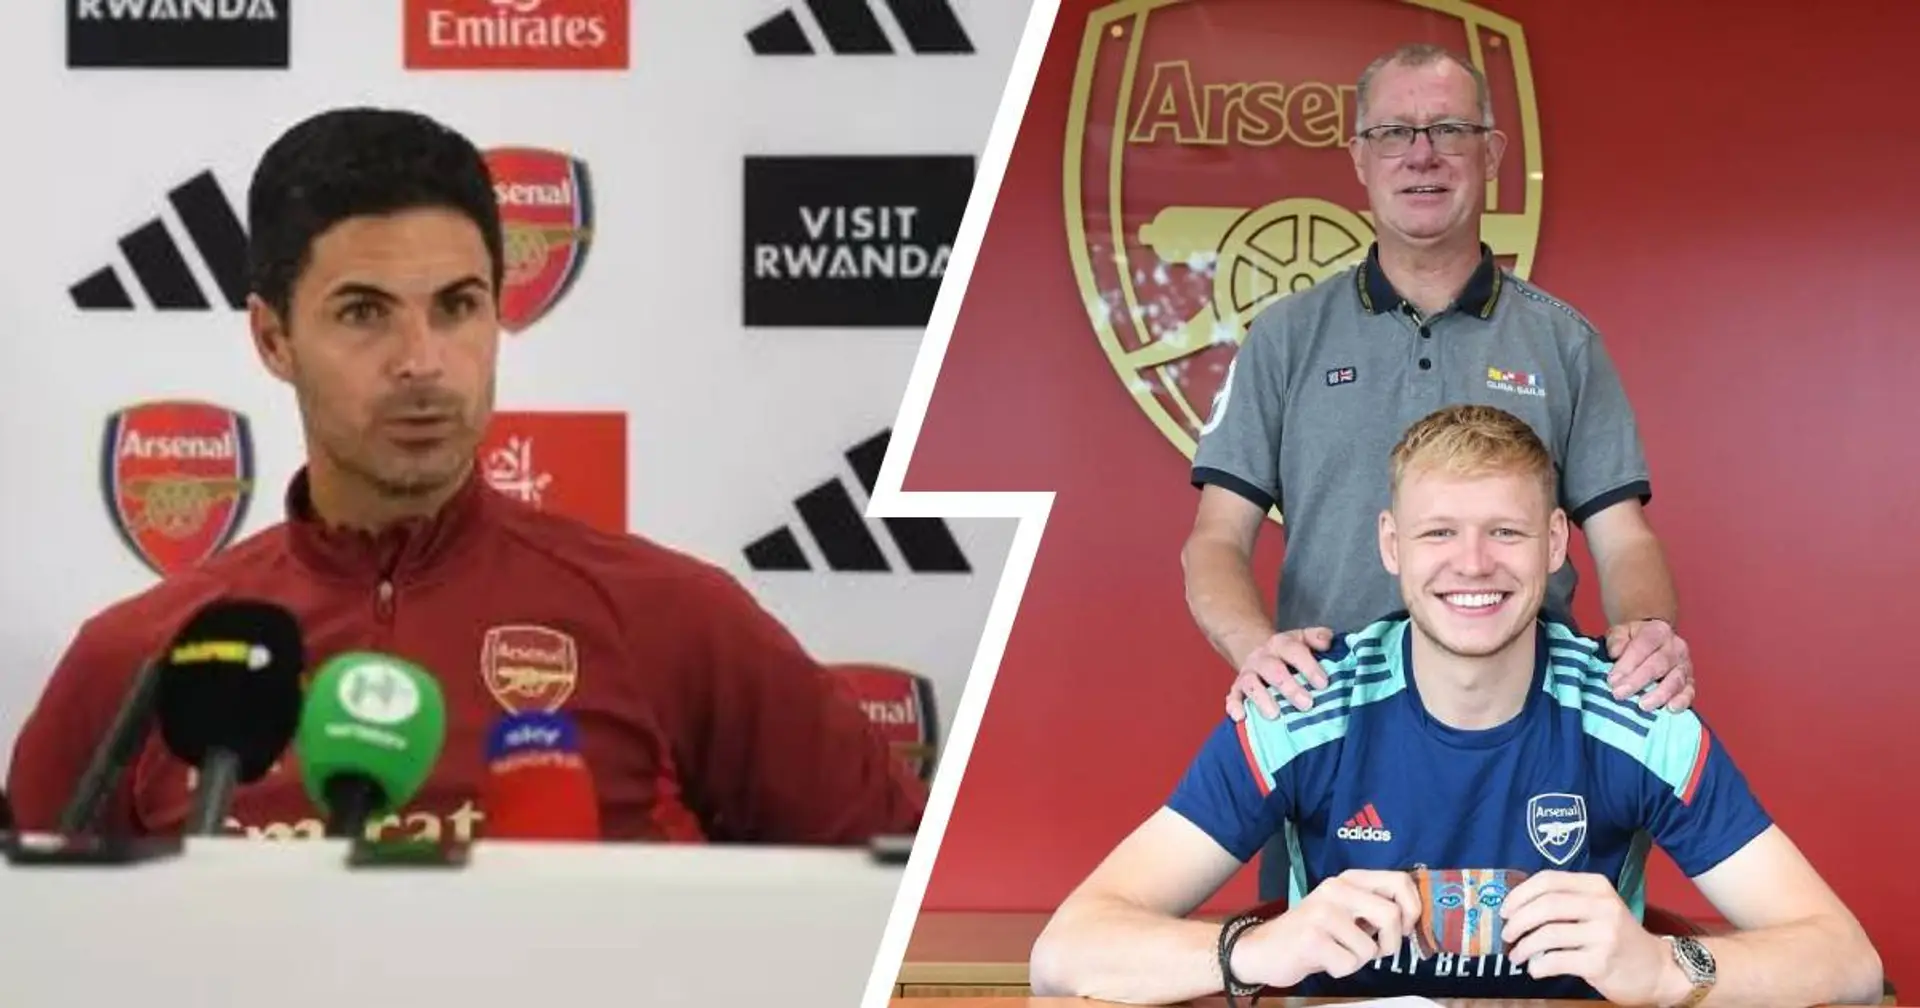 'Aaron played a few weeks ago': Arteta finally addresses Ramsdale's father's comments